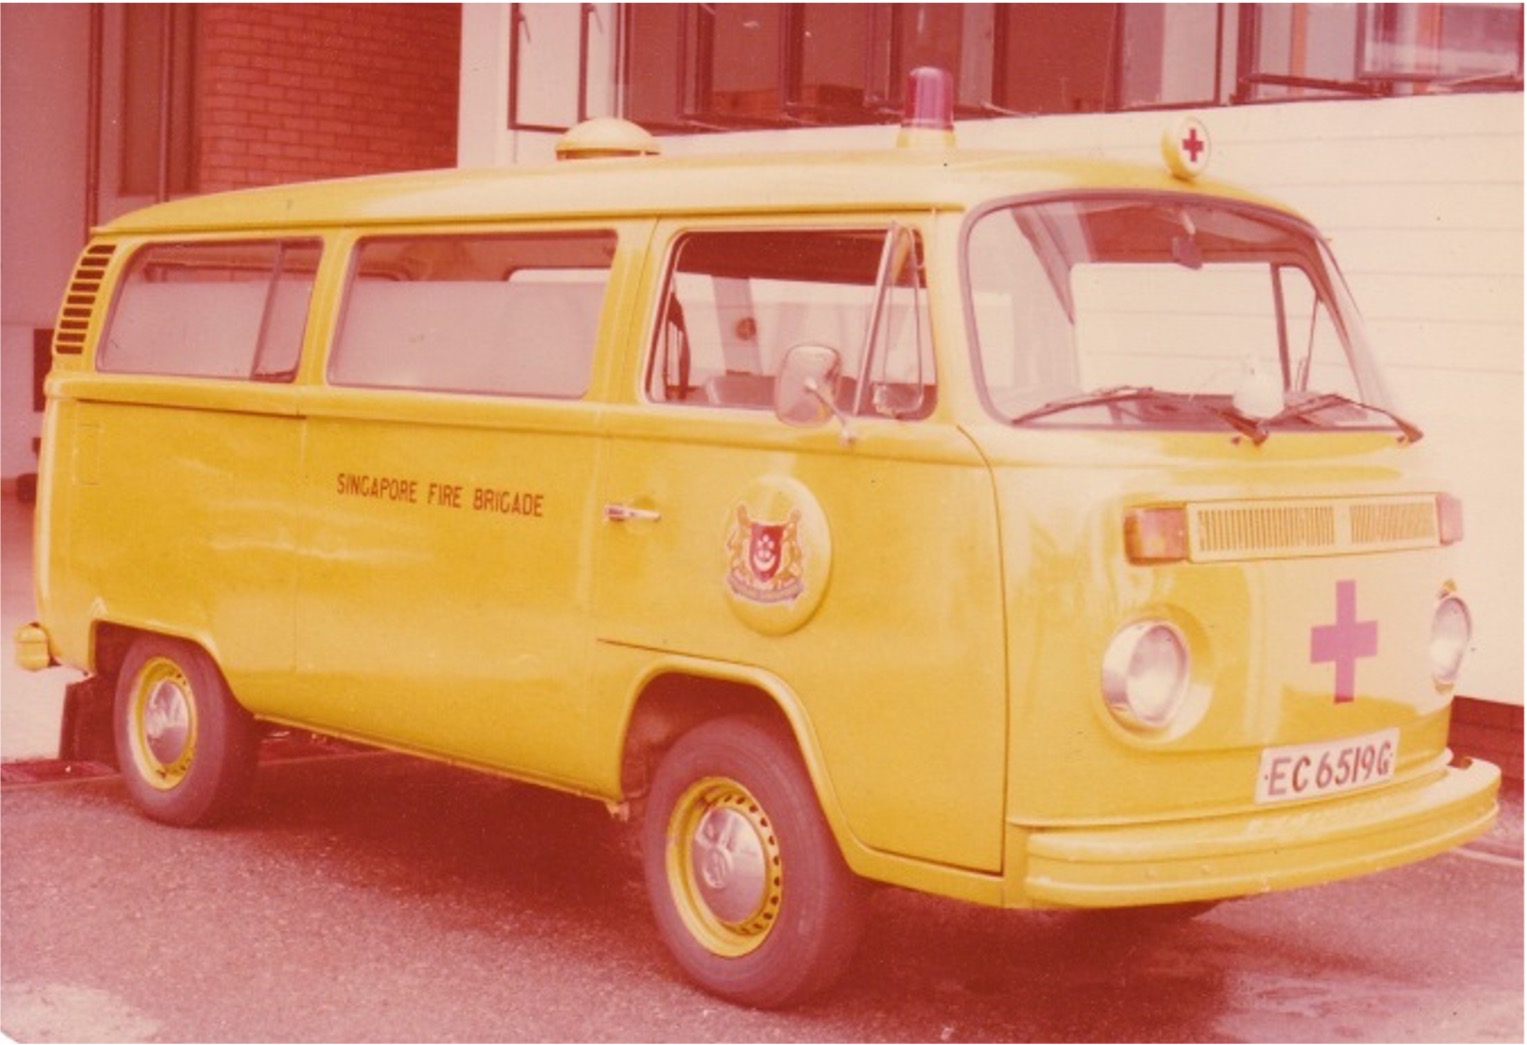 The Volkswagen Transporter (1959) was the ambulance operated by the Singapore Fire Brigade.